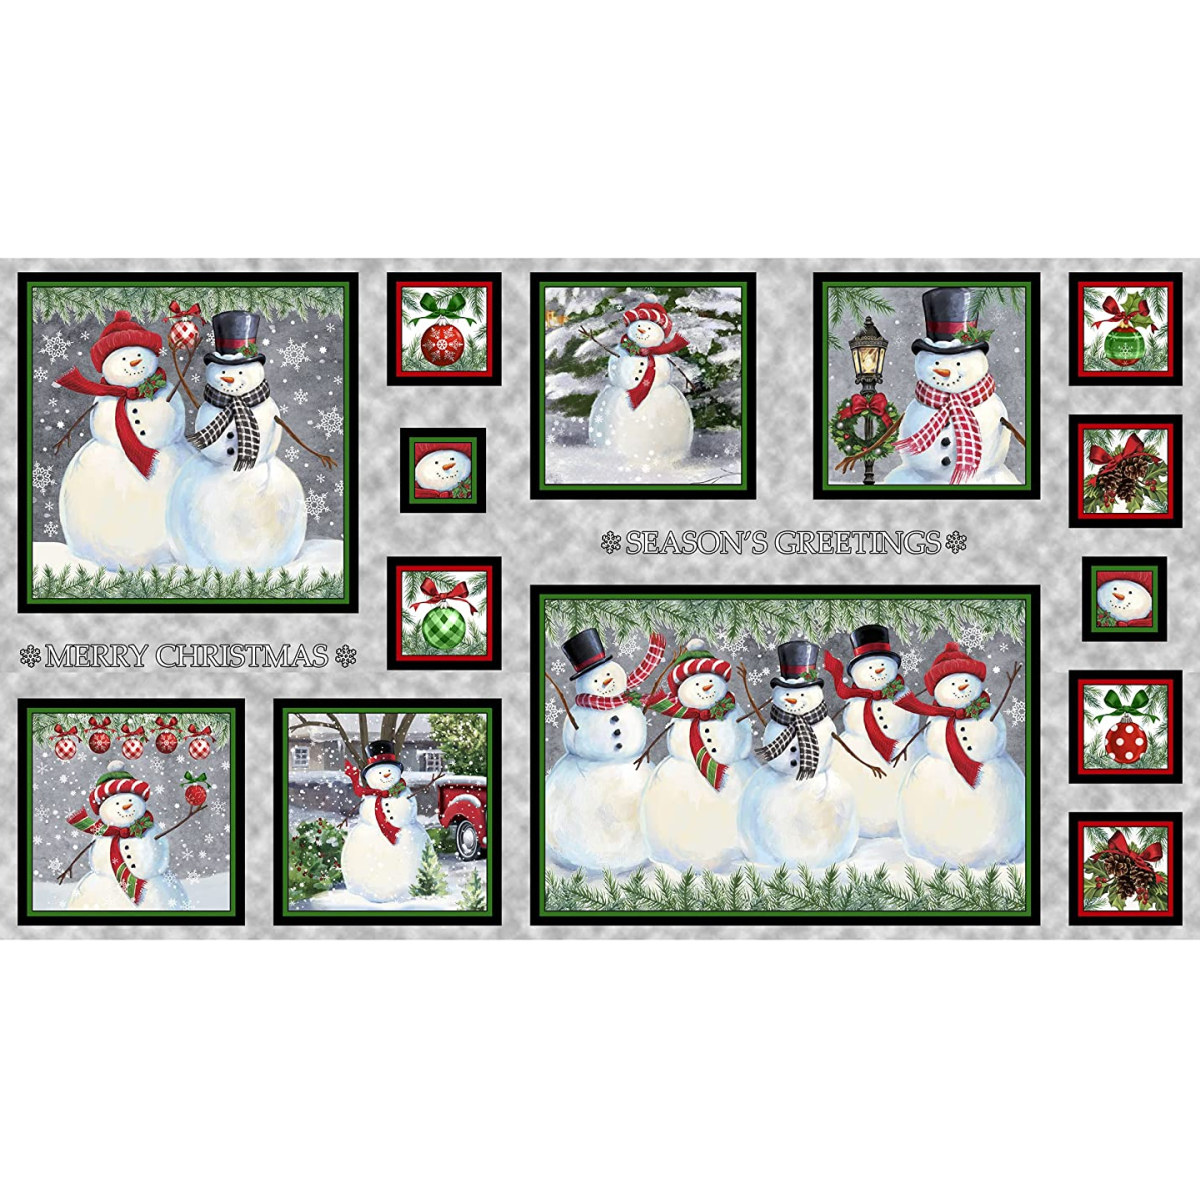 SNOWMAN PICTURE PATCHES - WINTER GREETINGS